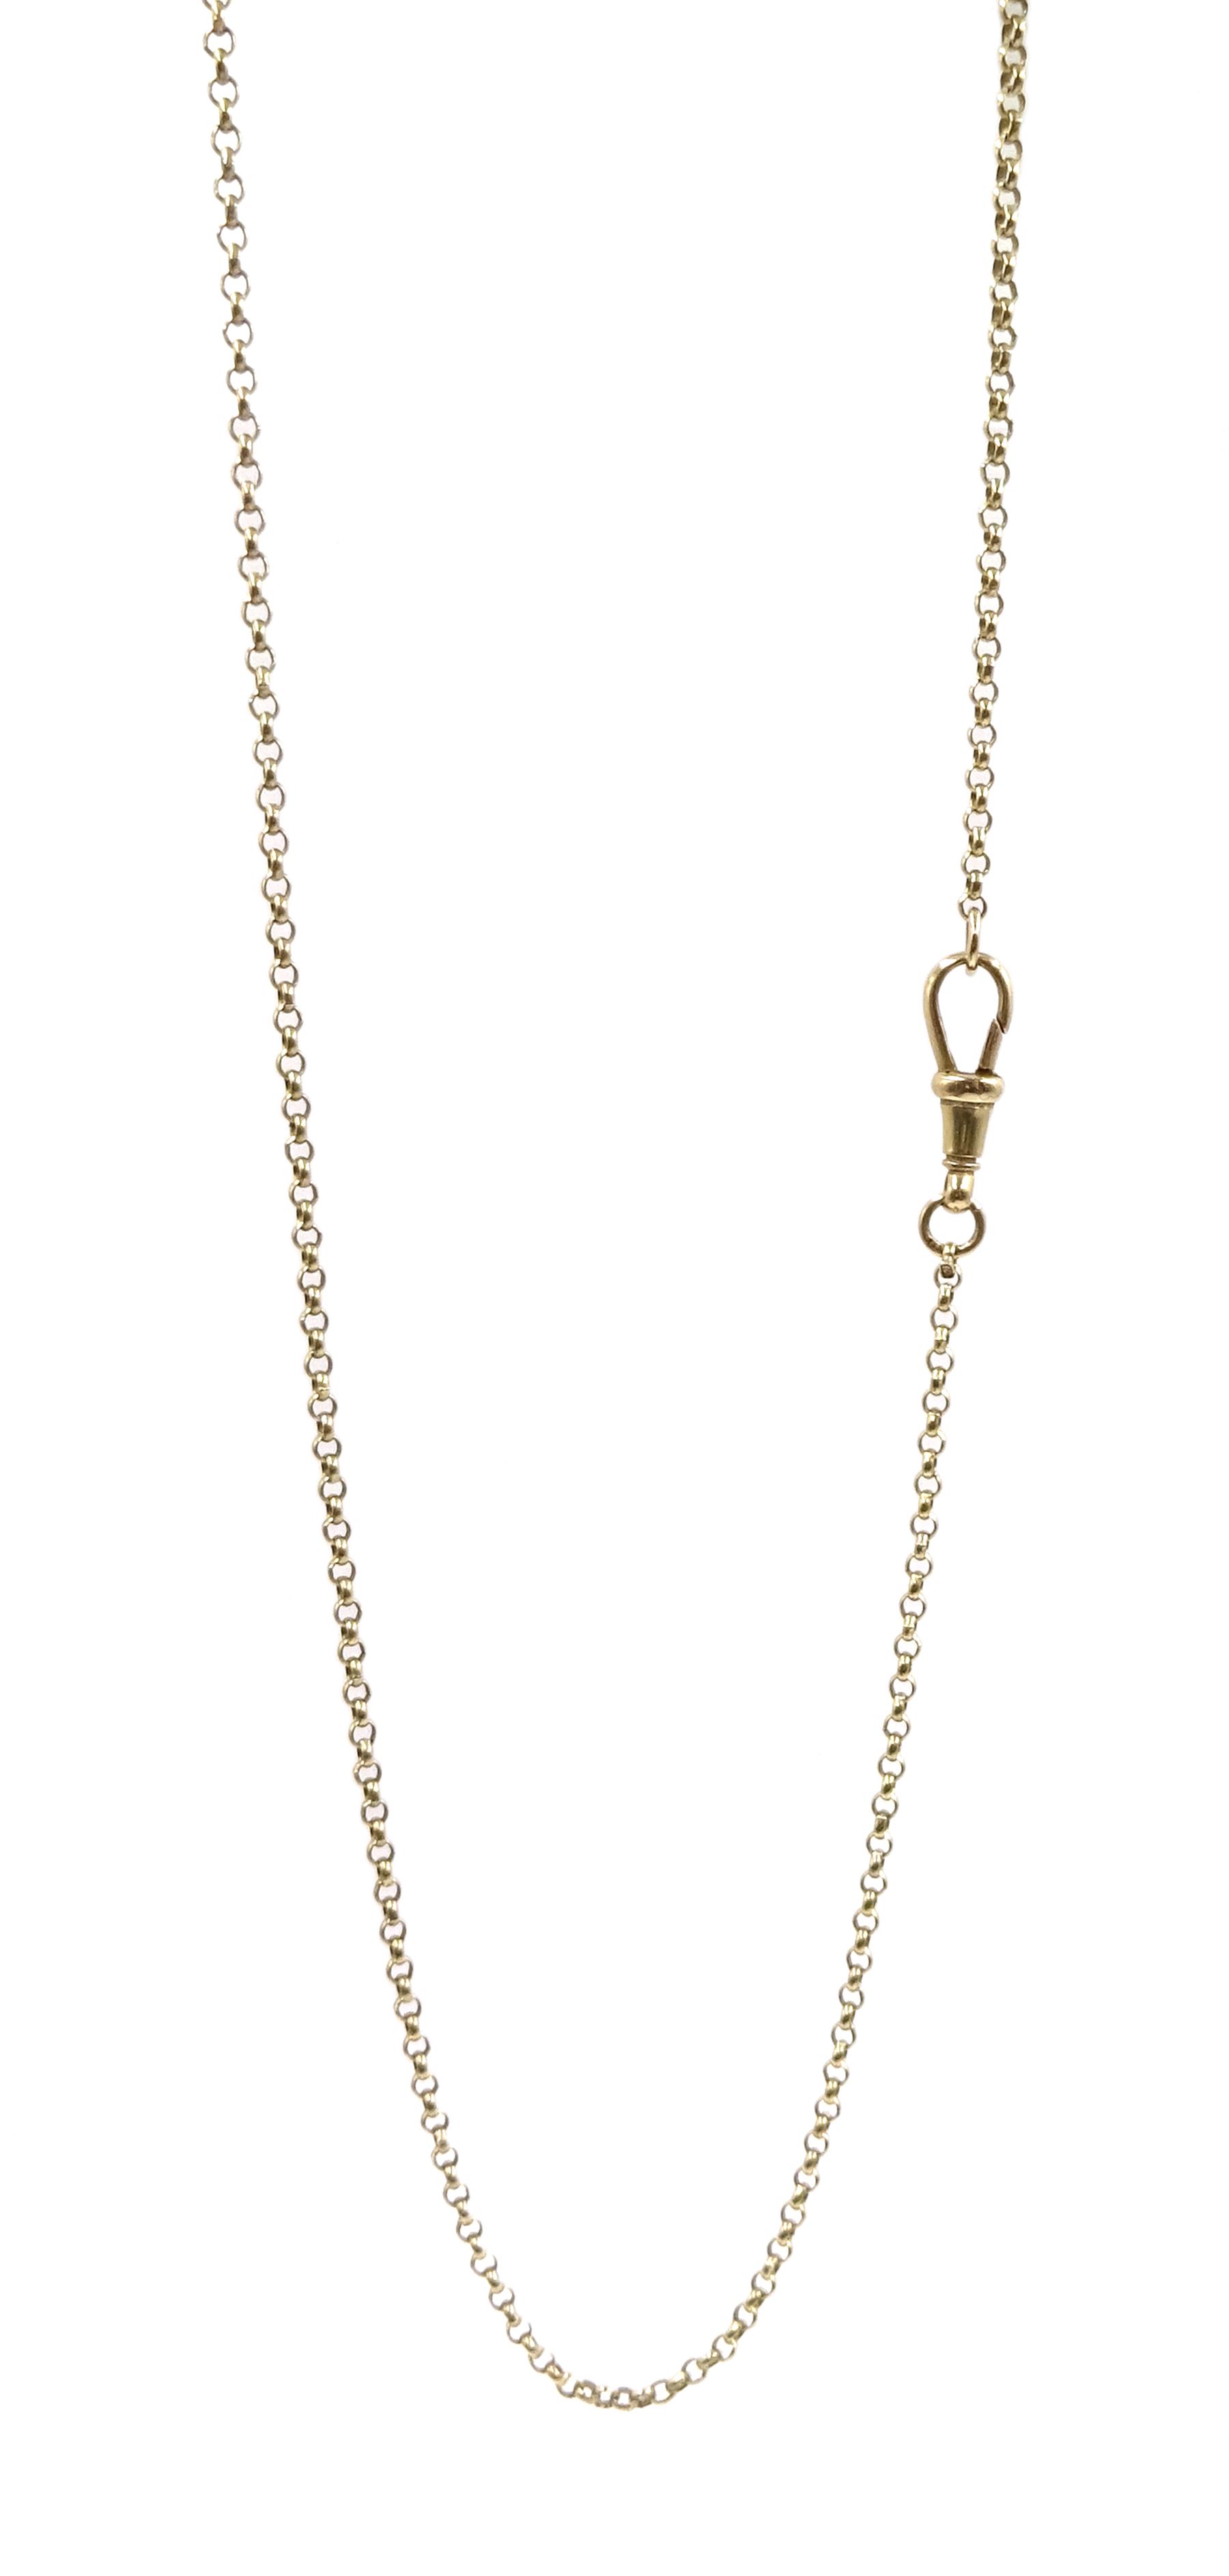 Gold cable link necklace stamped 9ct